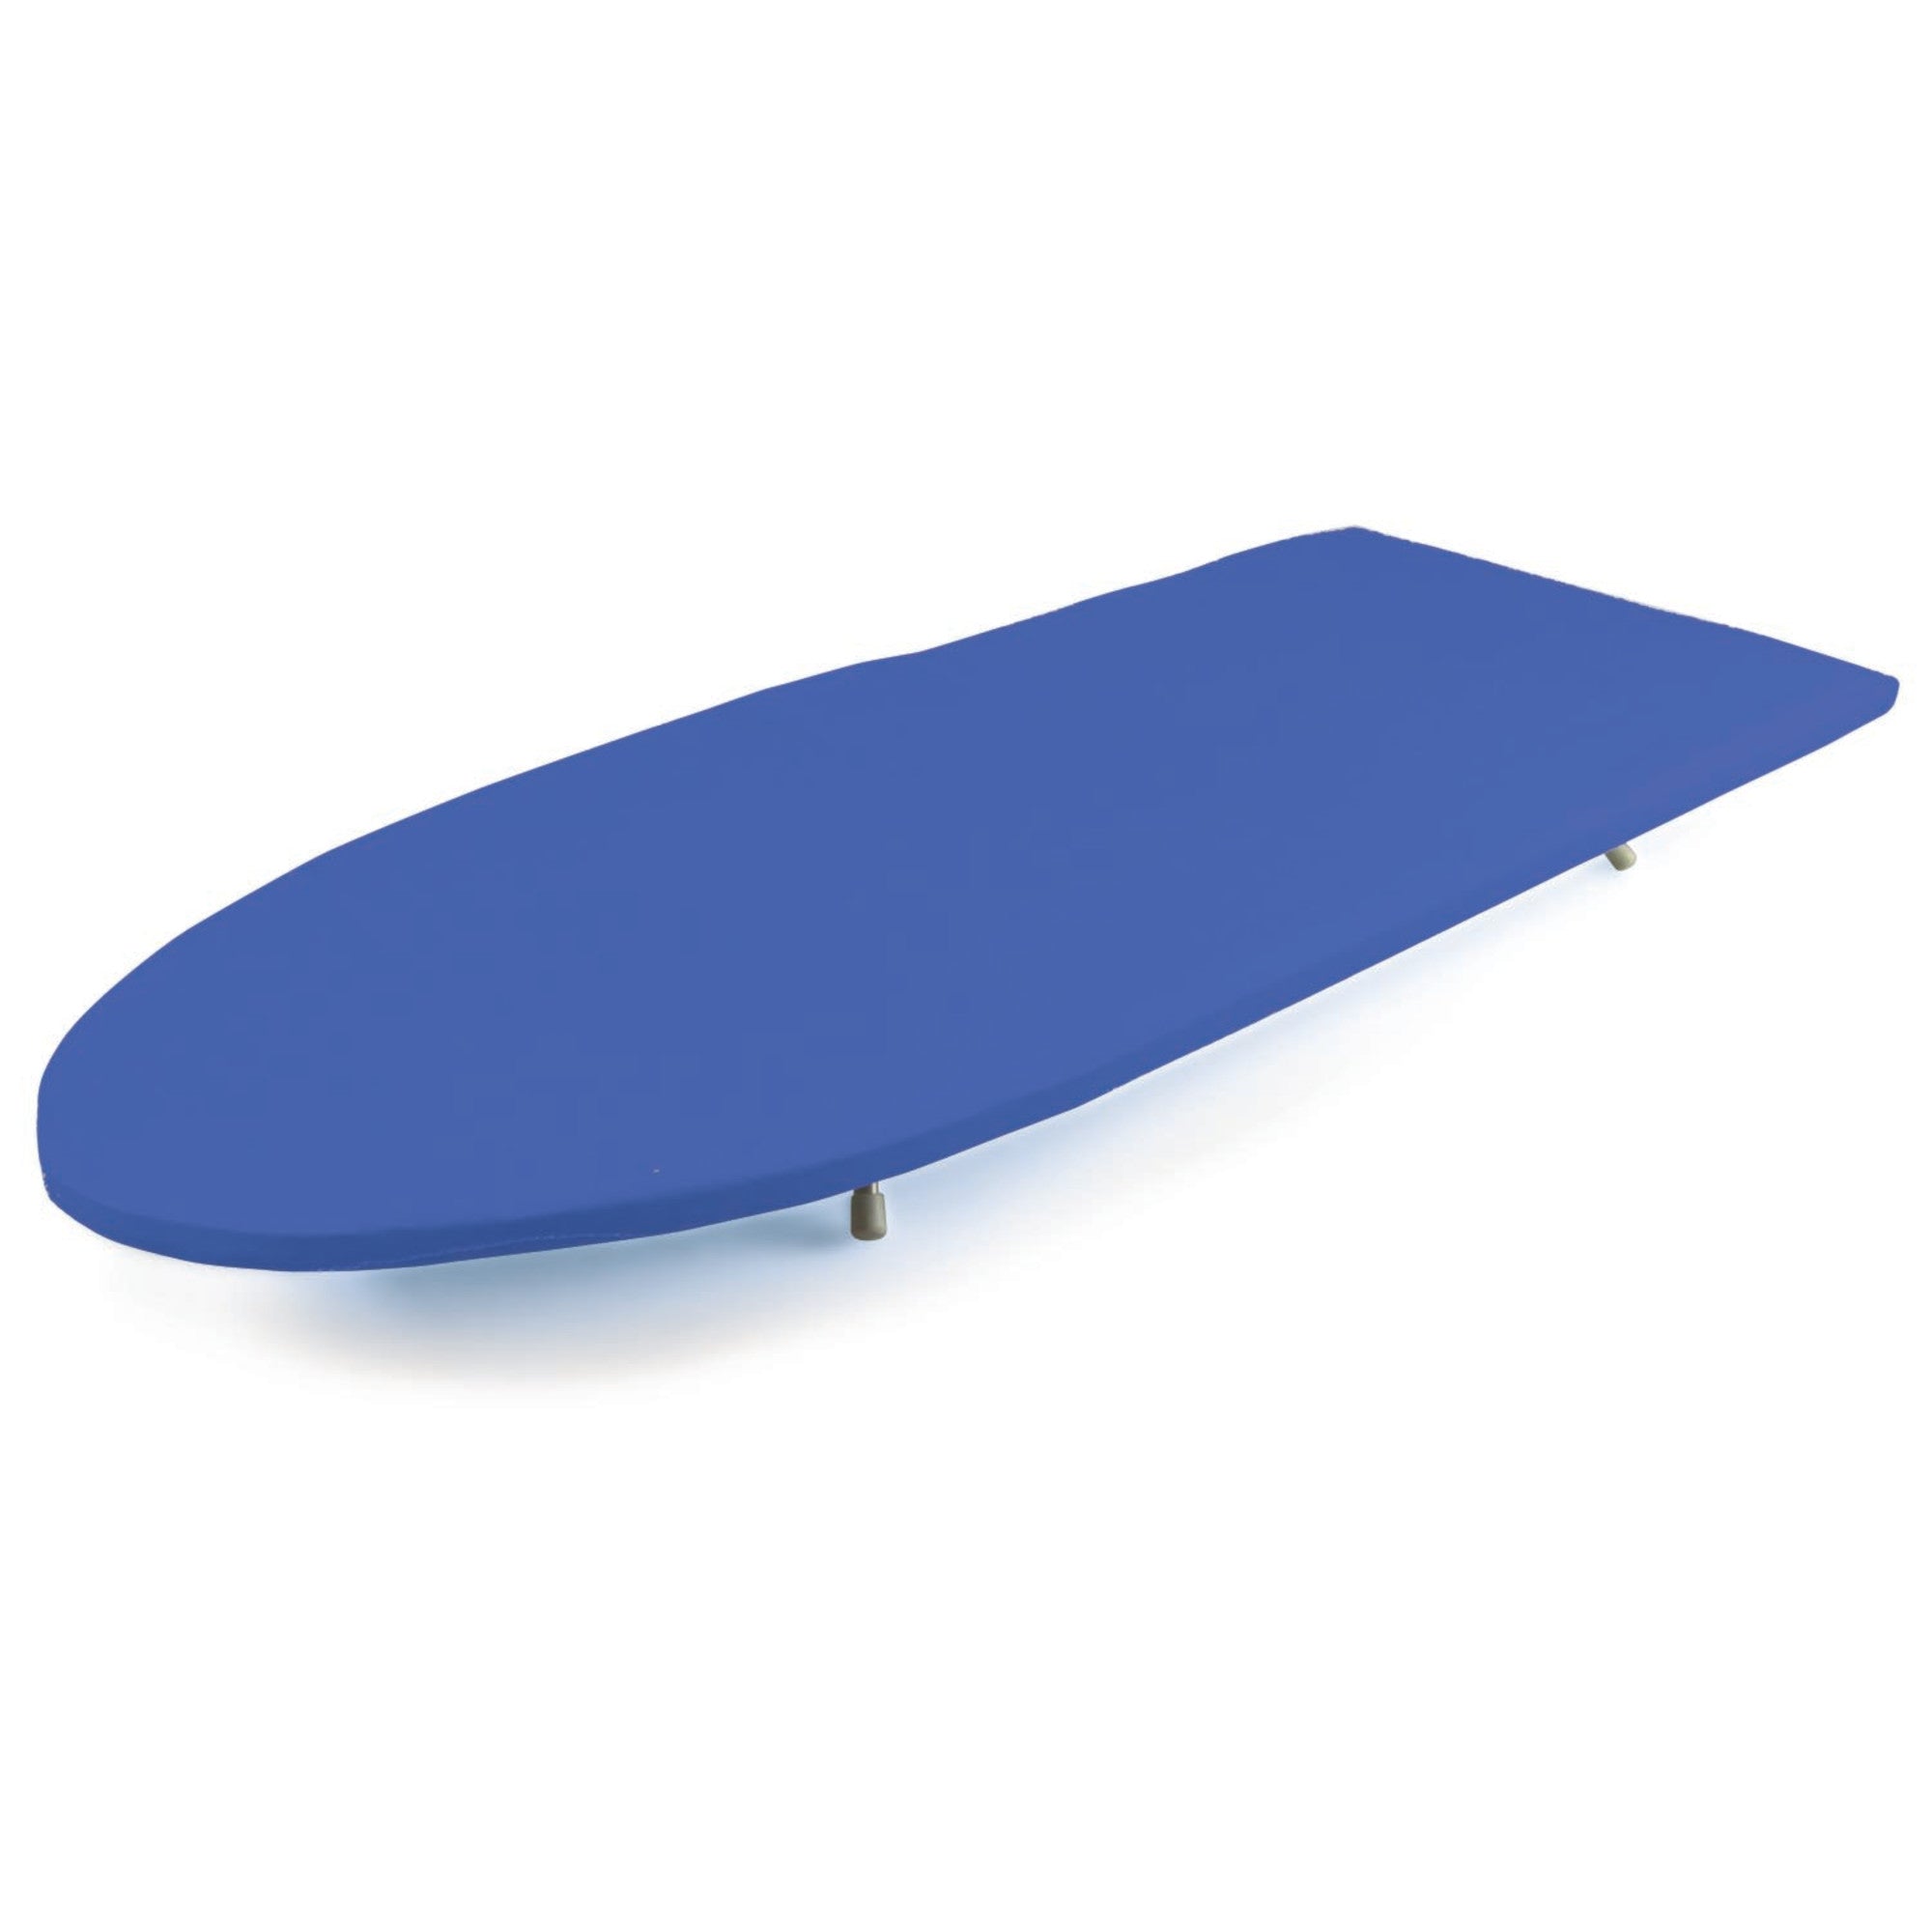 Home Basics MDF Tabletop Ironing Board - Assorted Colors